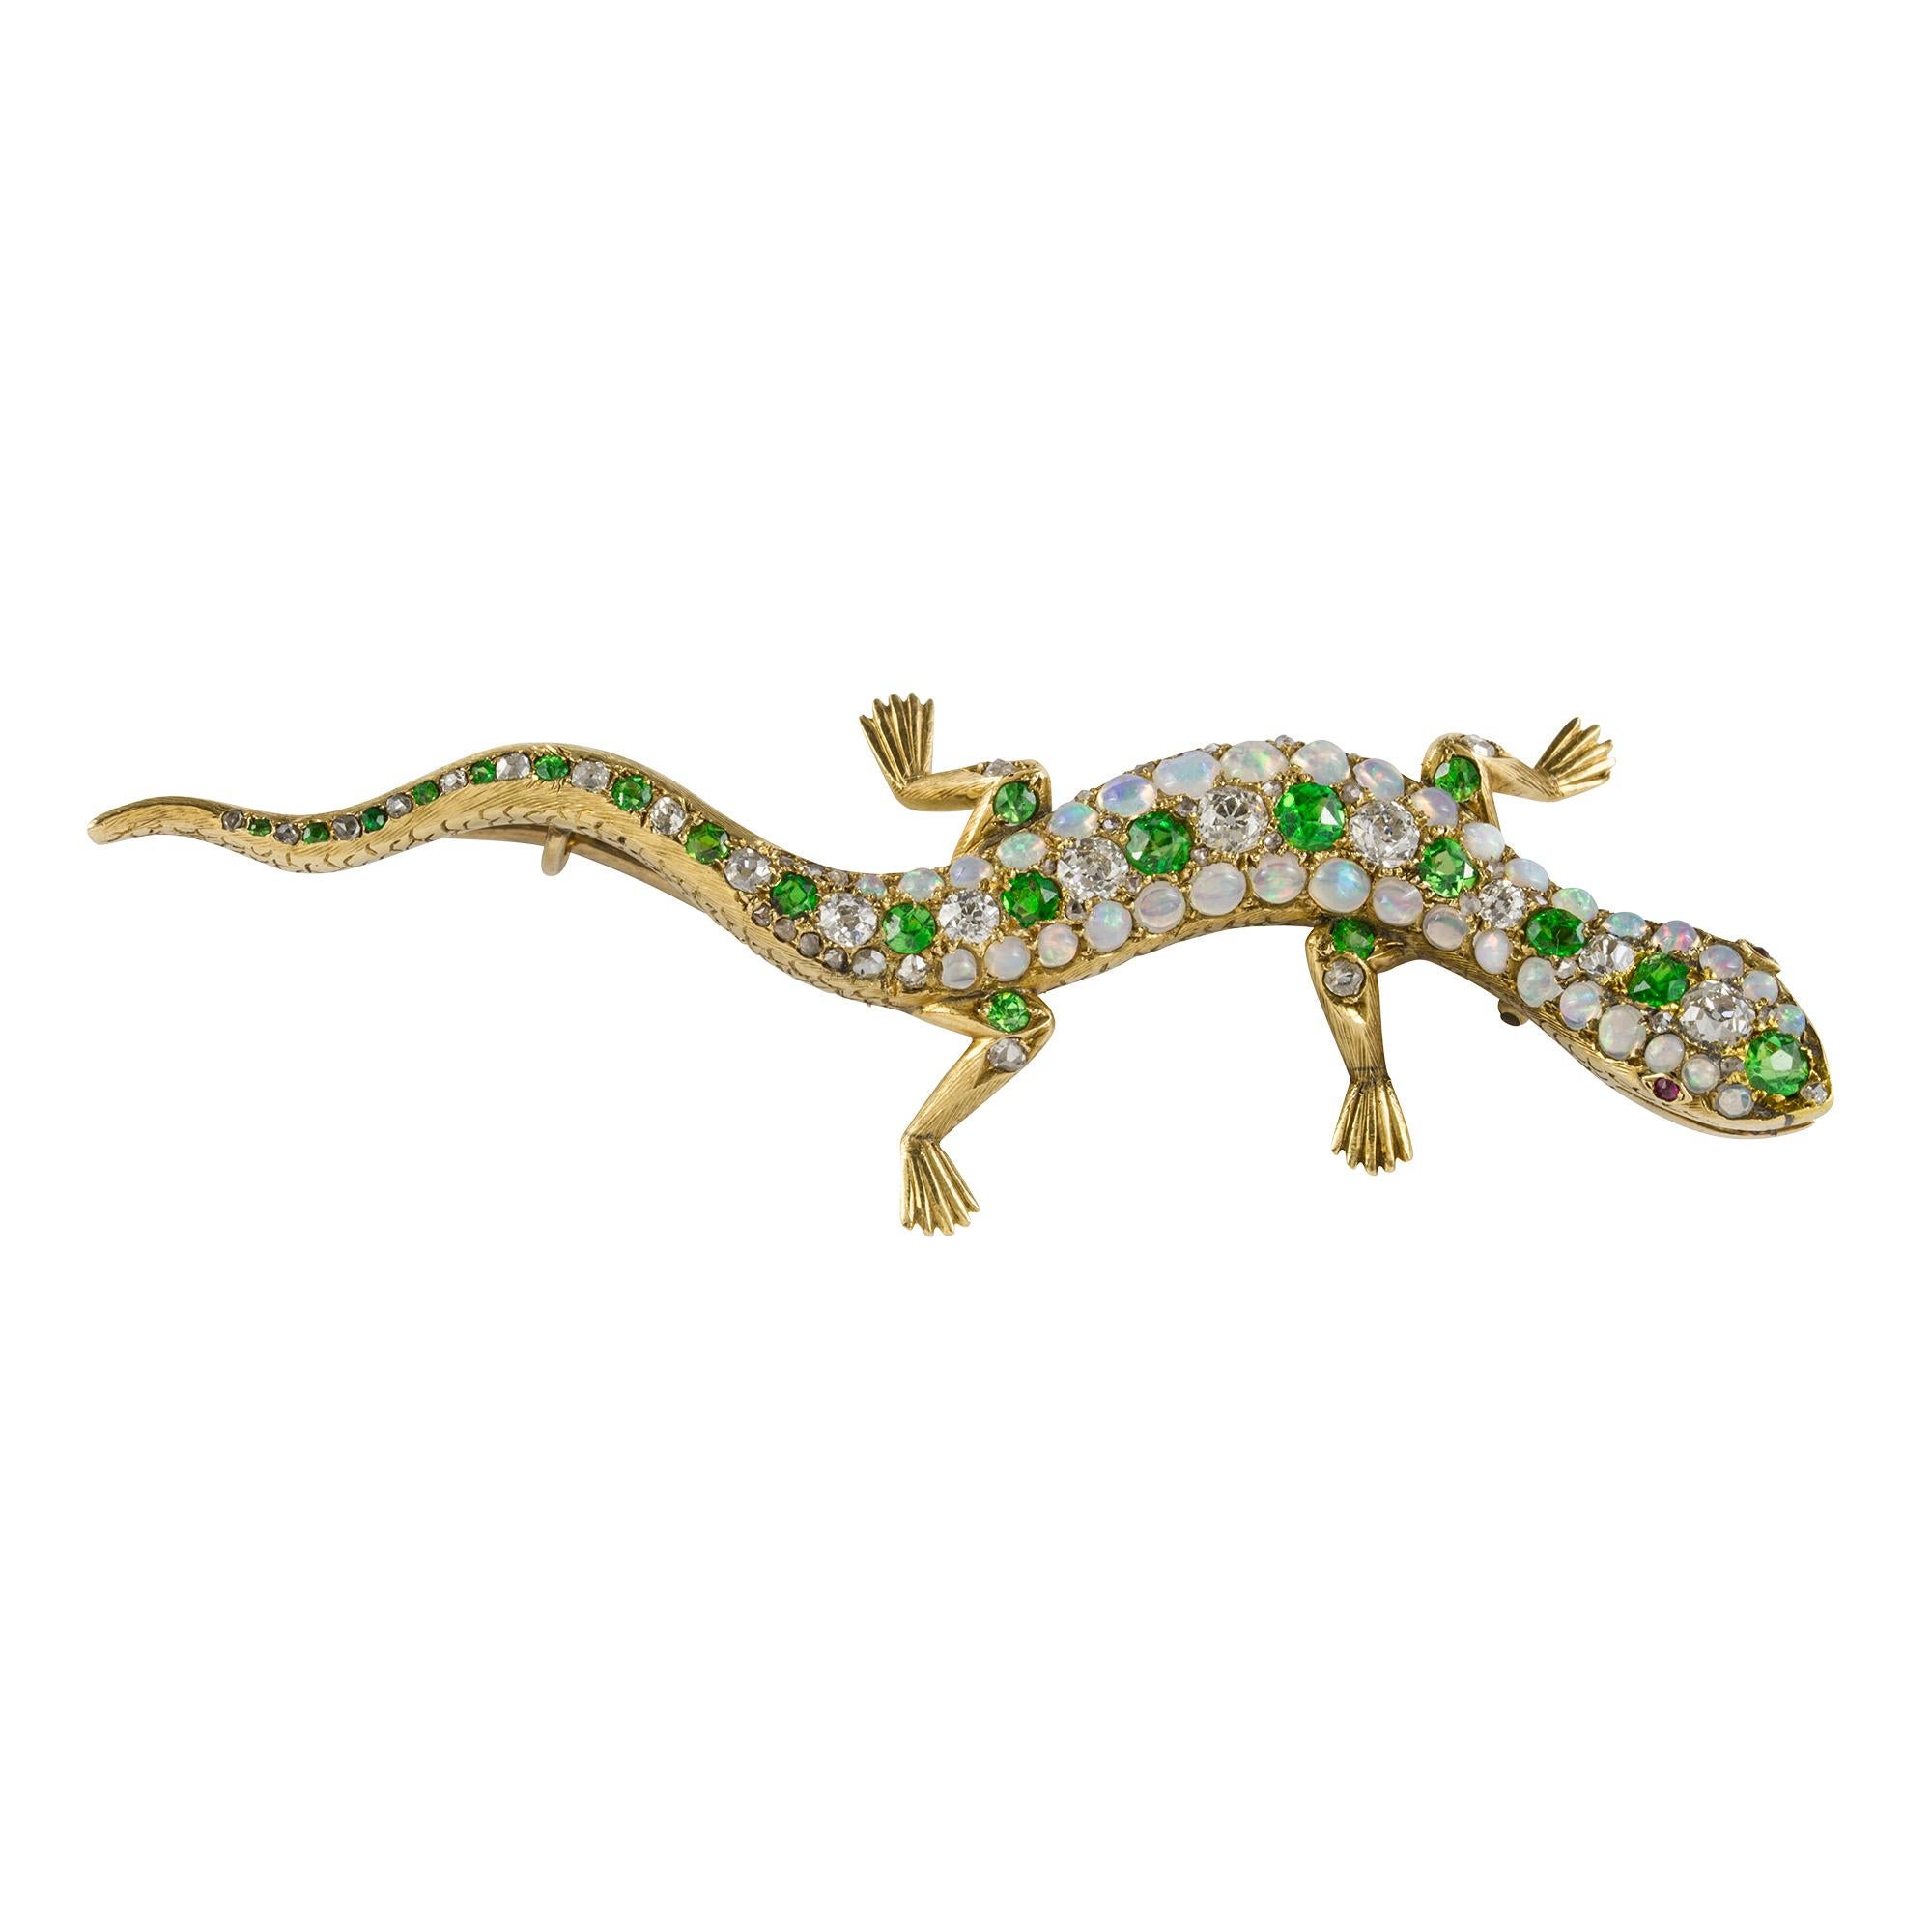 A Victorian garnet, opal and diamond lizard brooch, the sinuous body set throughout with a row of alternating round faceted demantoid garnets and old brilliant-cut diamonds to the centre of two rows of cabochon-cut opals, with engraved body on the